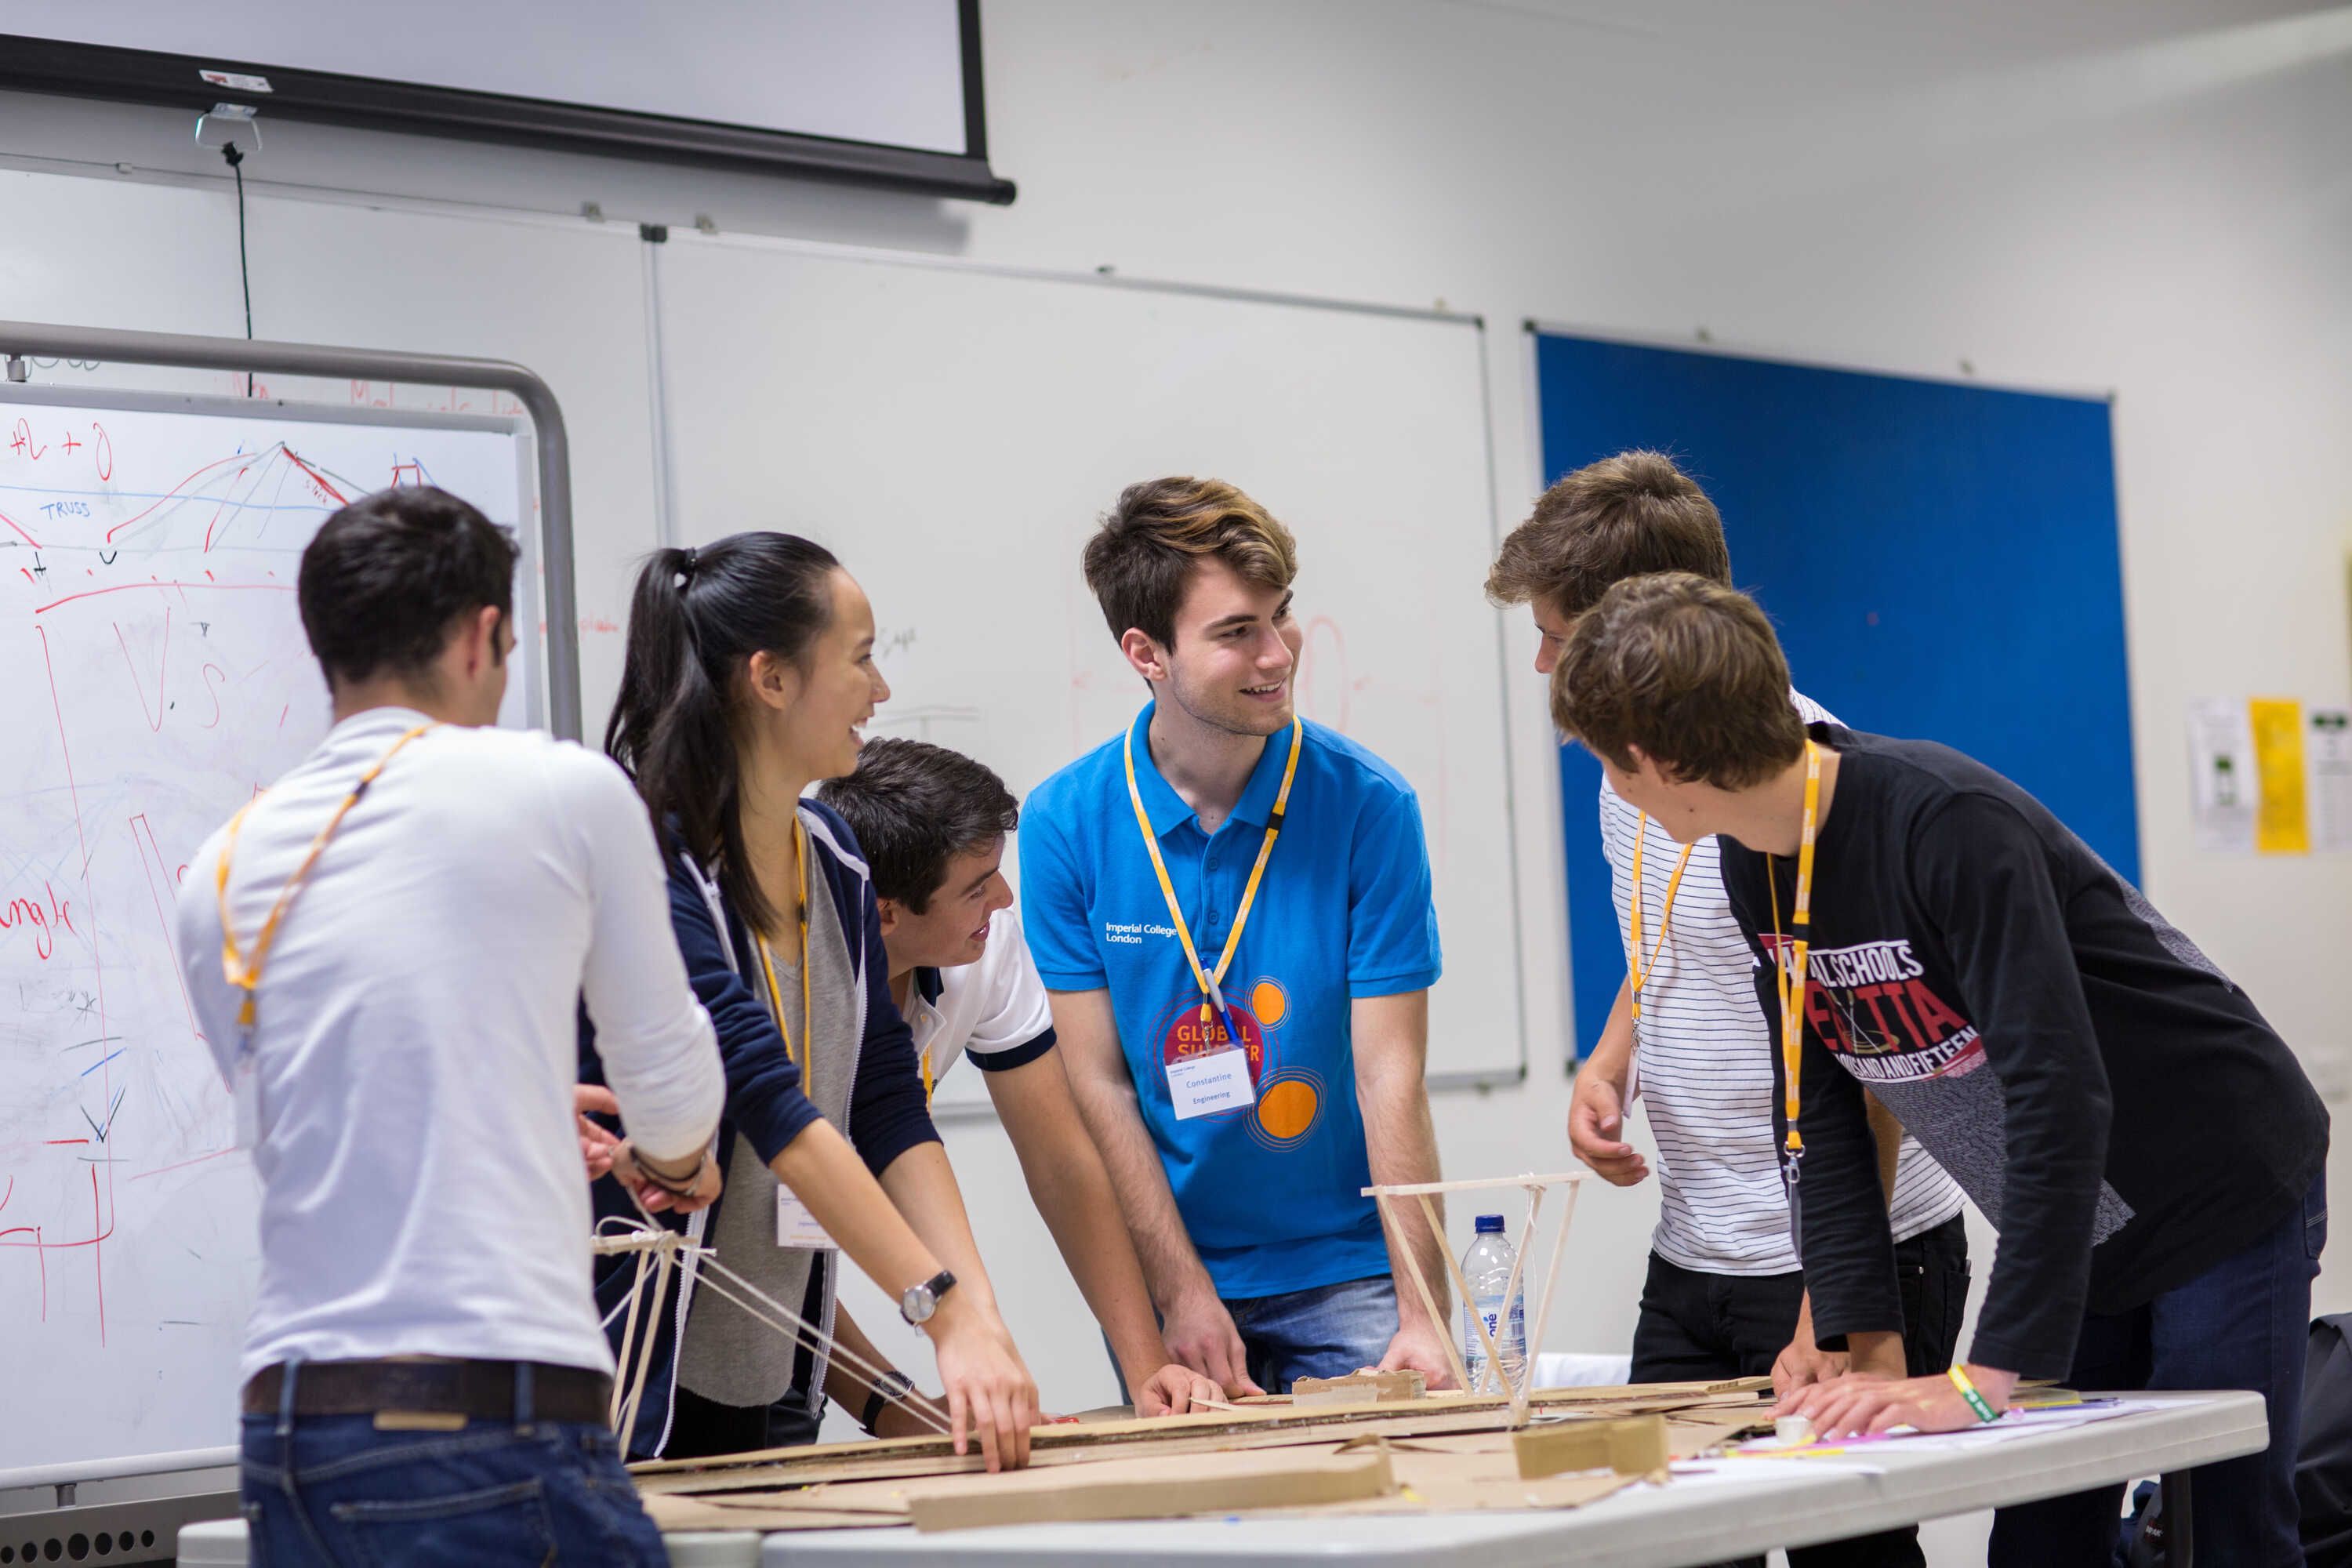 Global summer school students in a practical engineering class